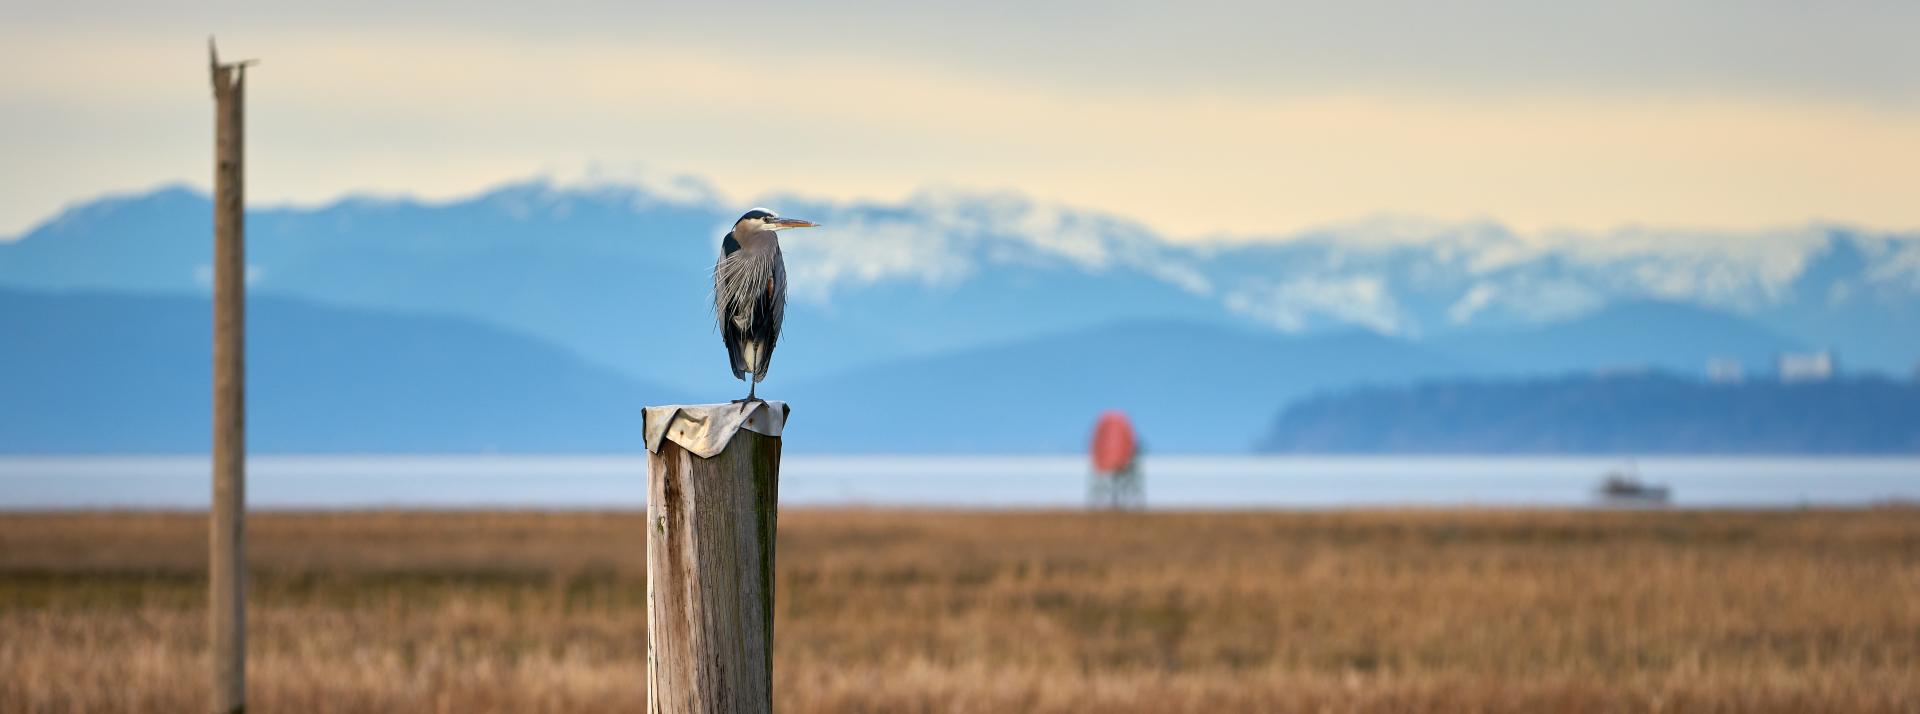 A great blue heron perched above the marshes off the West Dyke Trail in Richmond, British Columbia, Canada.